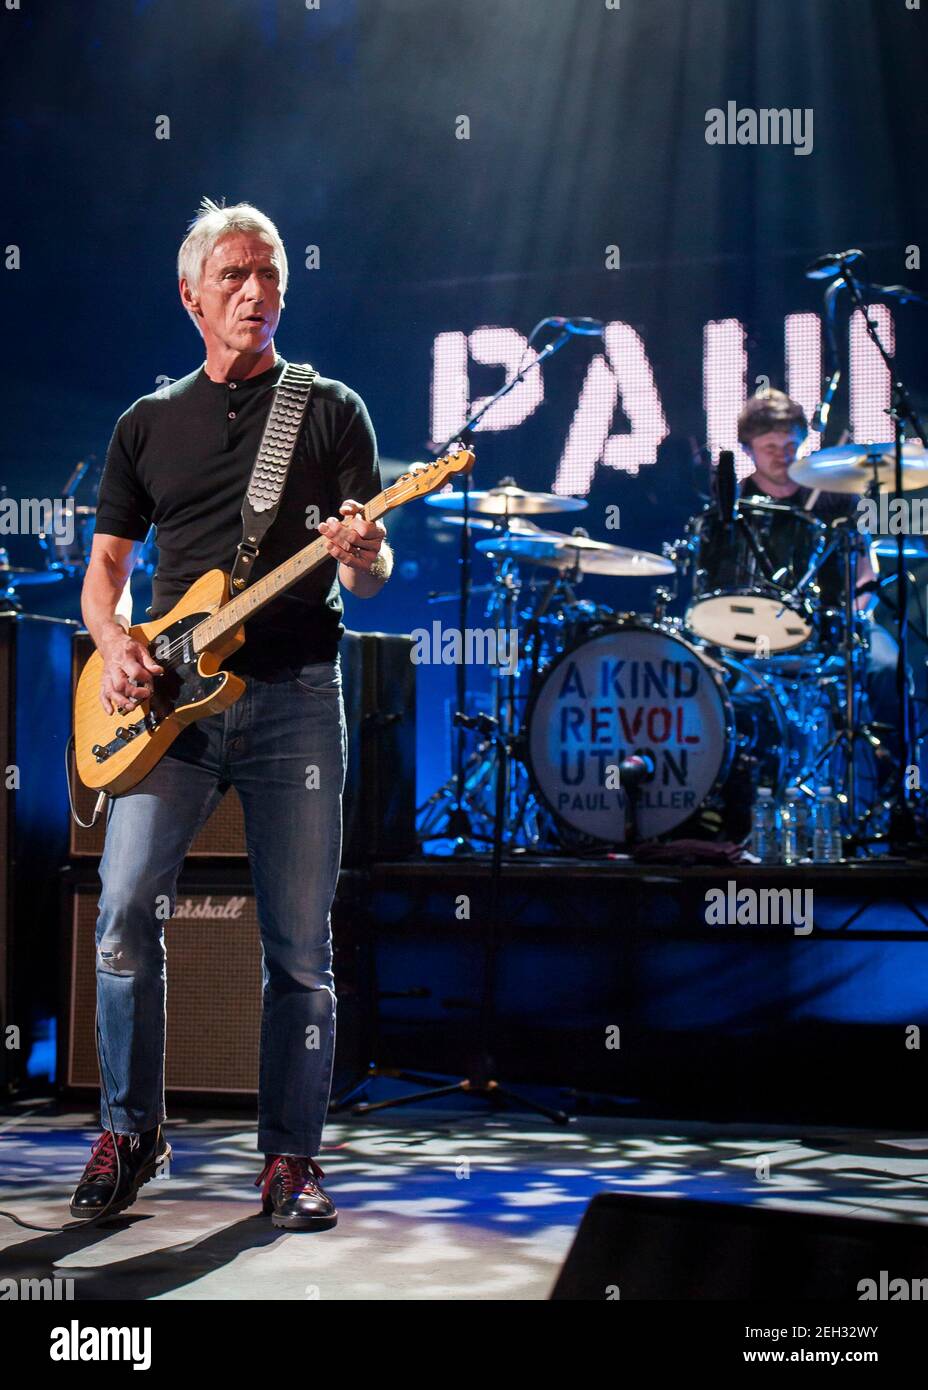 Paul Weller performs on stage for the Teenage Cancer Trust annual concert series at the Royal Albert Hall in London. Picture Date: Friday 31st March 2017. Photo credit should read: © DavidJensen Stock Photo